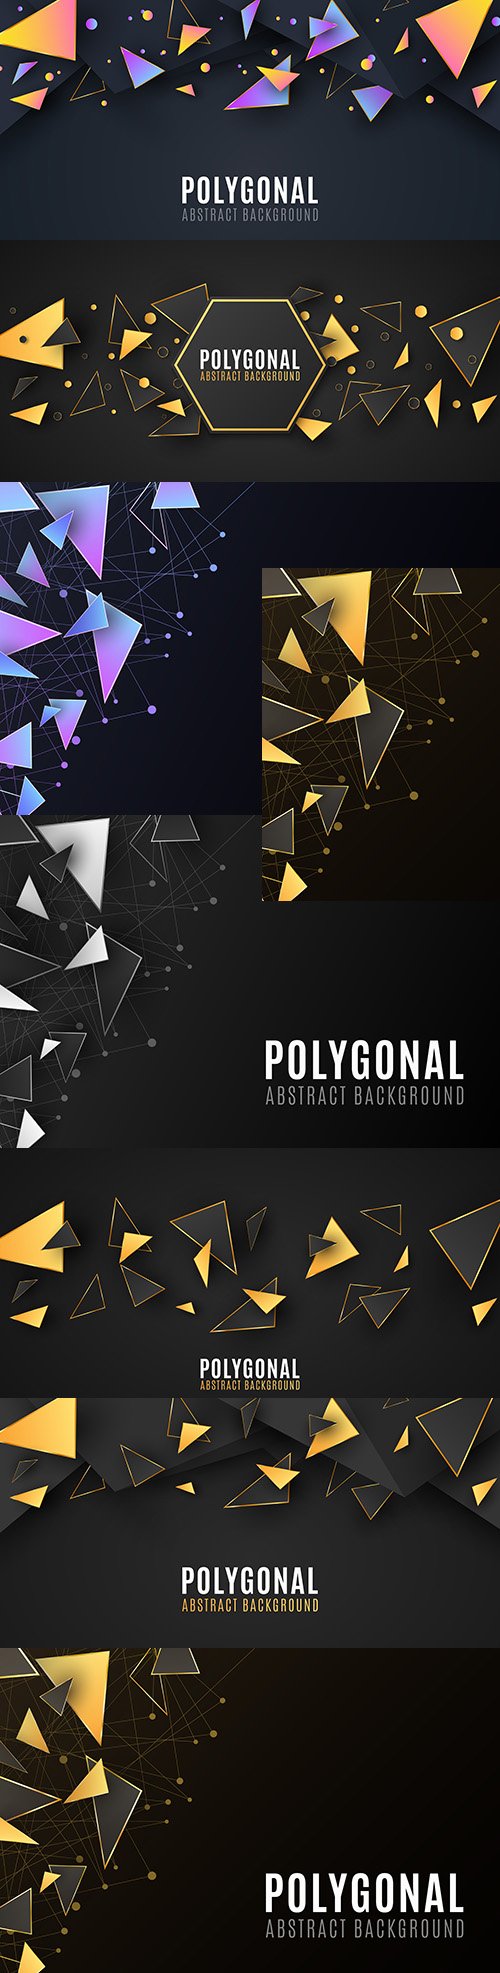 Polygon abstract background stylish design